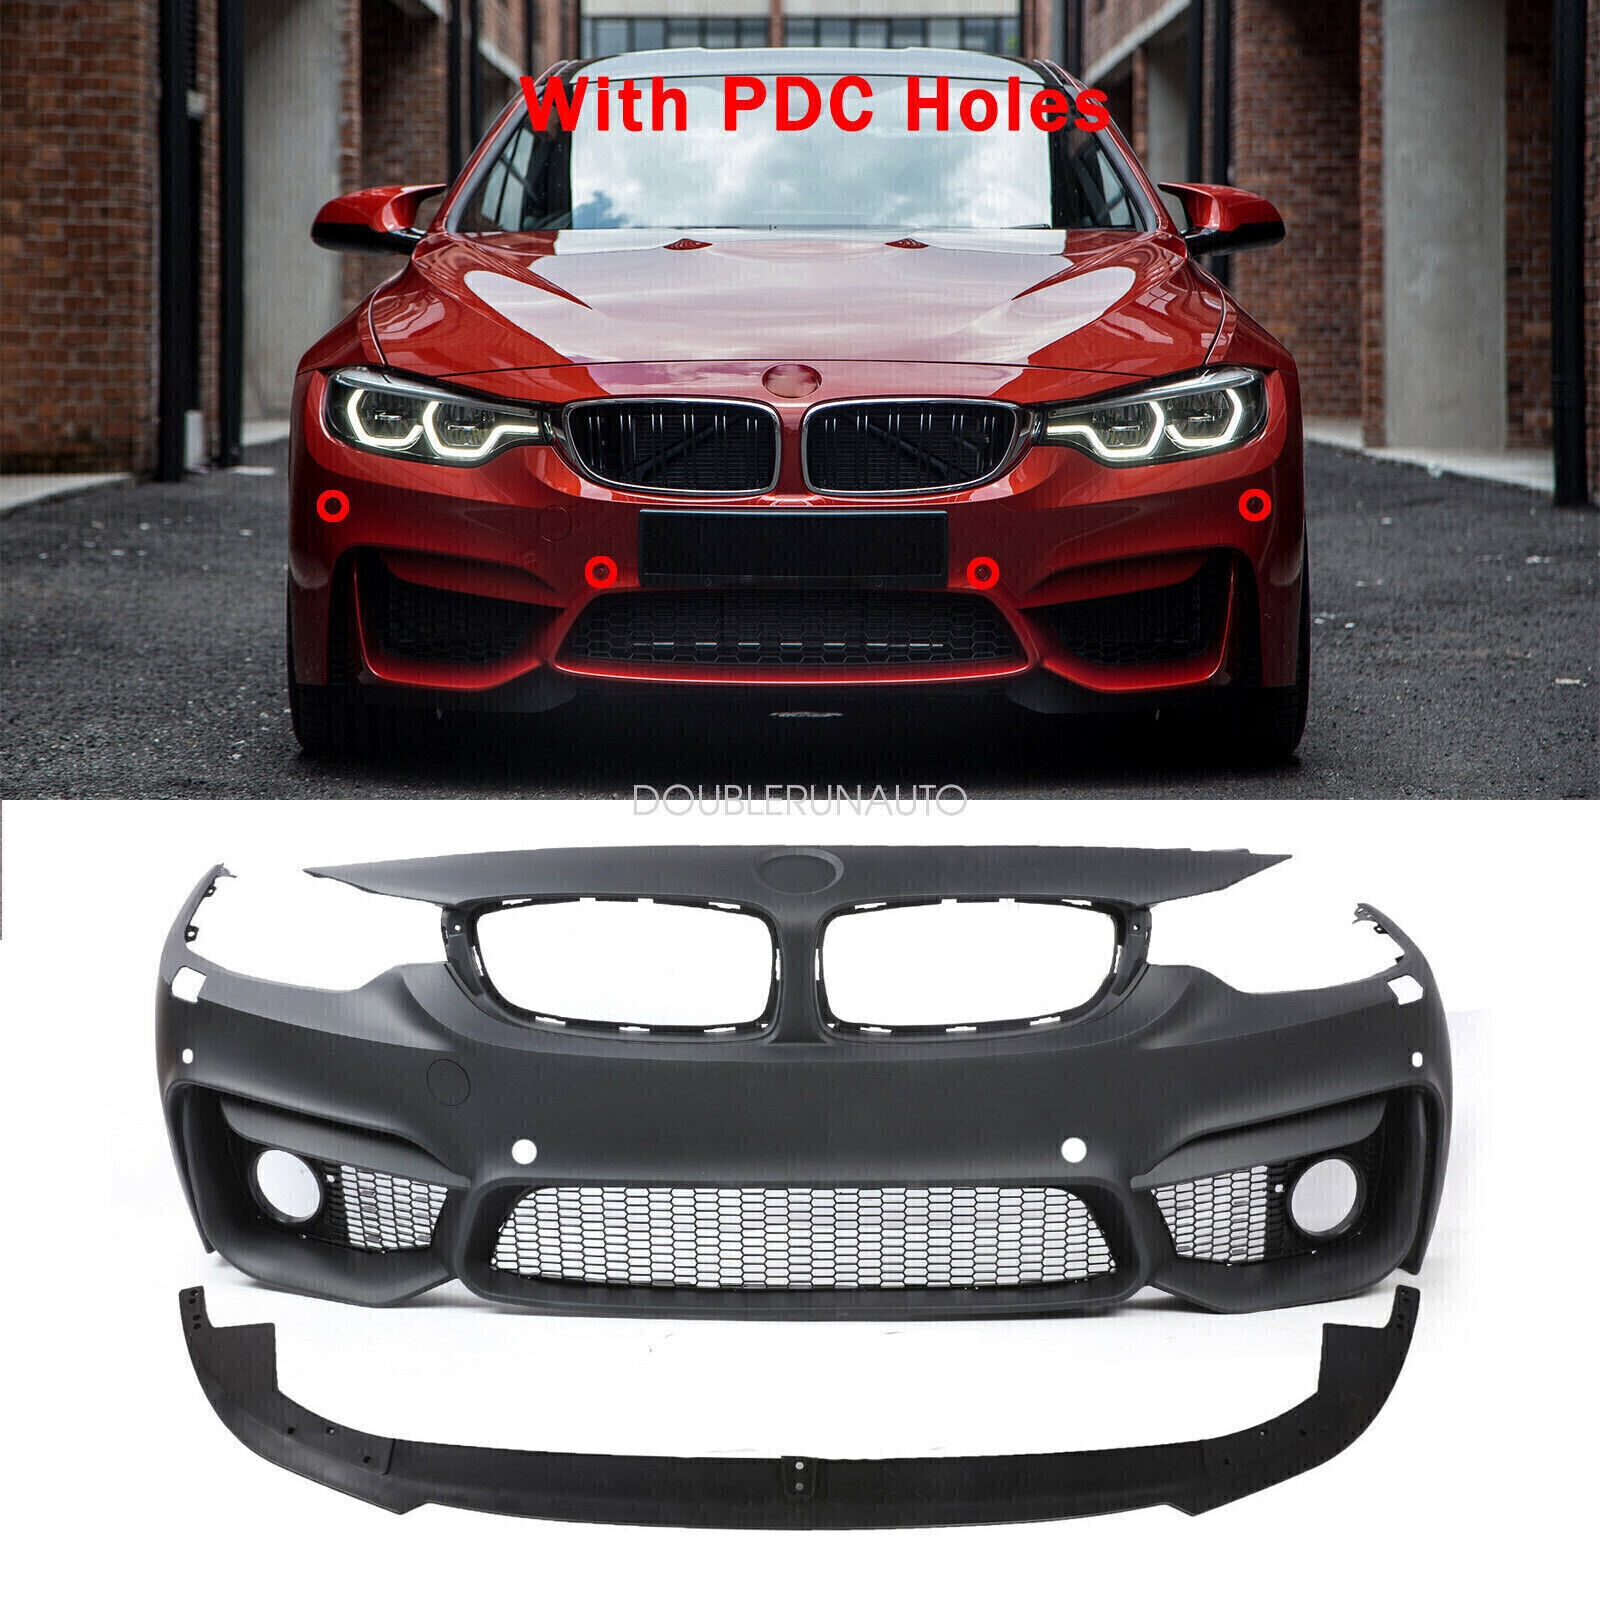 M4 Style Front Bumper  with PDC For BMW F32 F33 F36 4 SERIES 14-19 w/o fog light